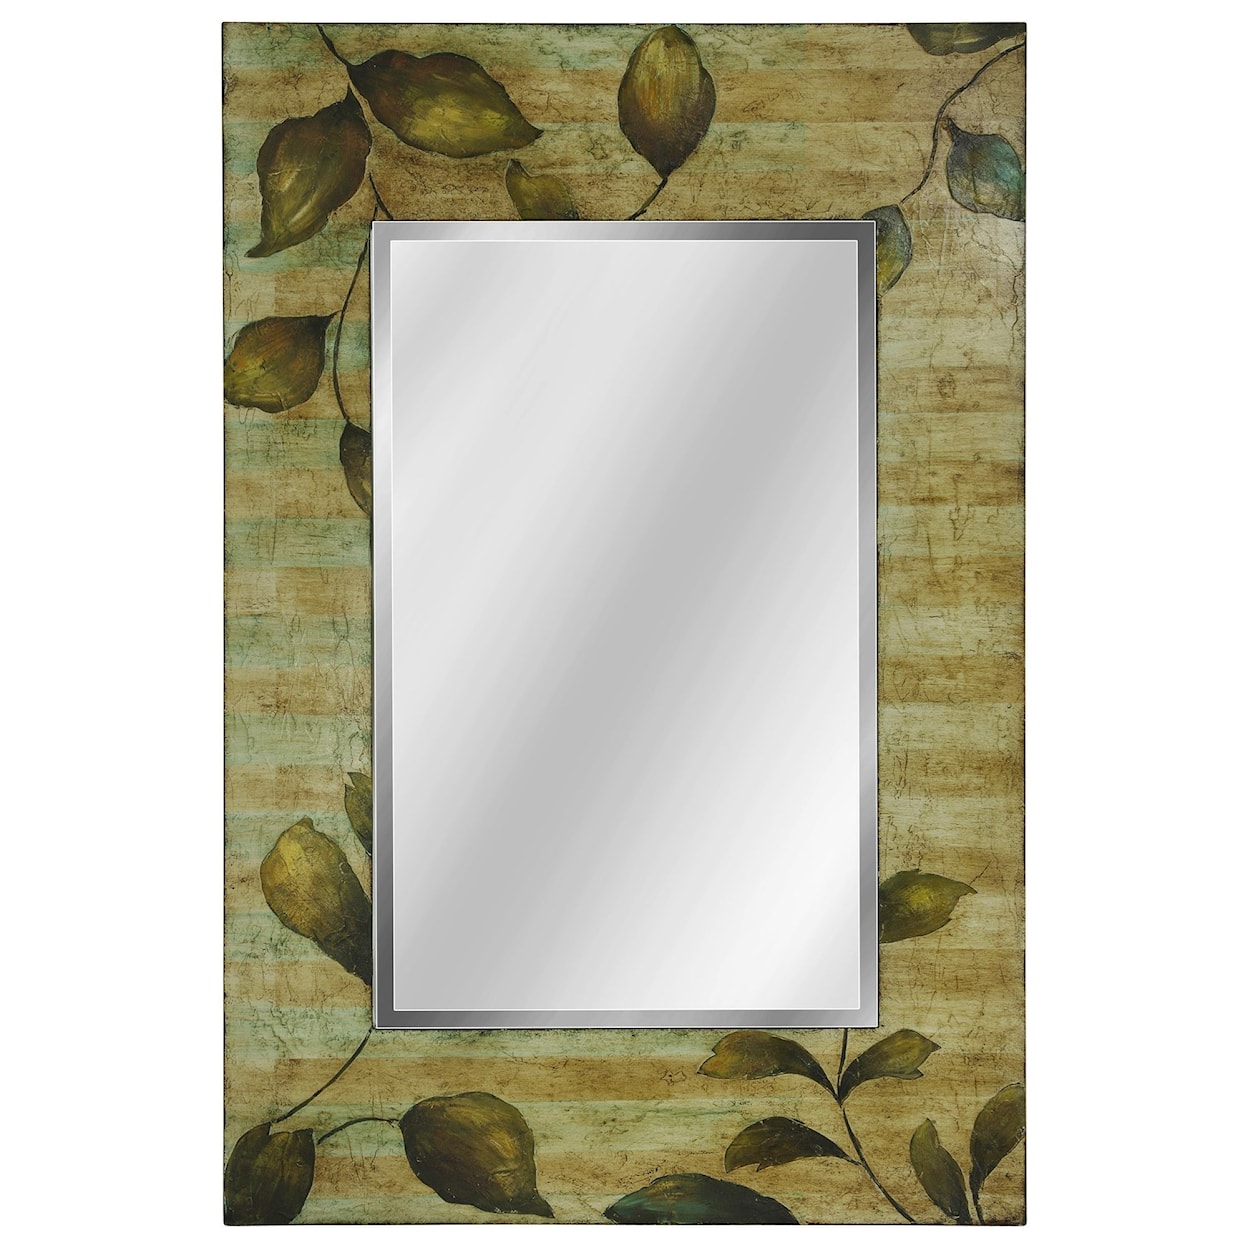 StyleCraft Mirrors Hand Painted Foil Wall Mirror